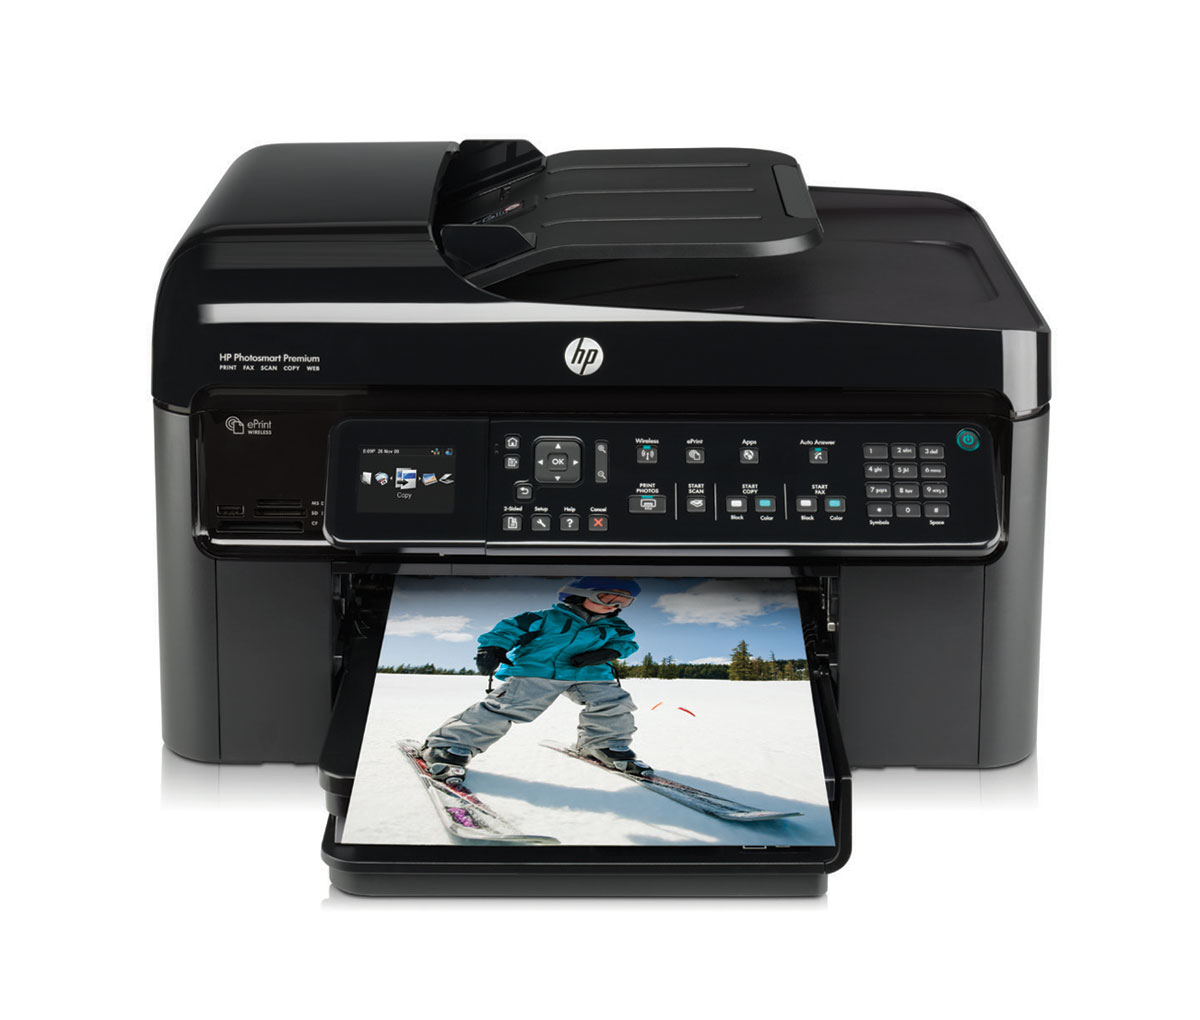 HP Photosmart Premium Fax e-All-in-One Front View